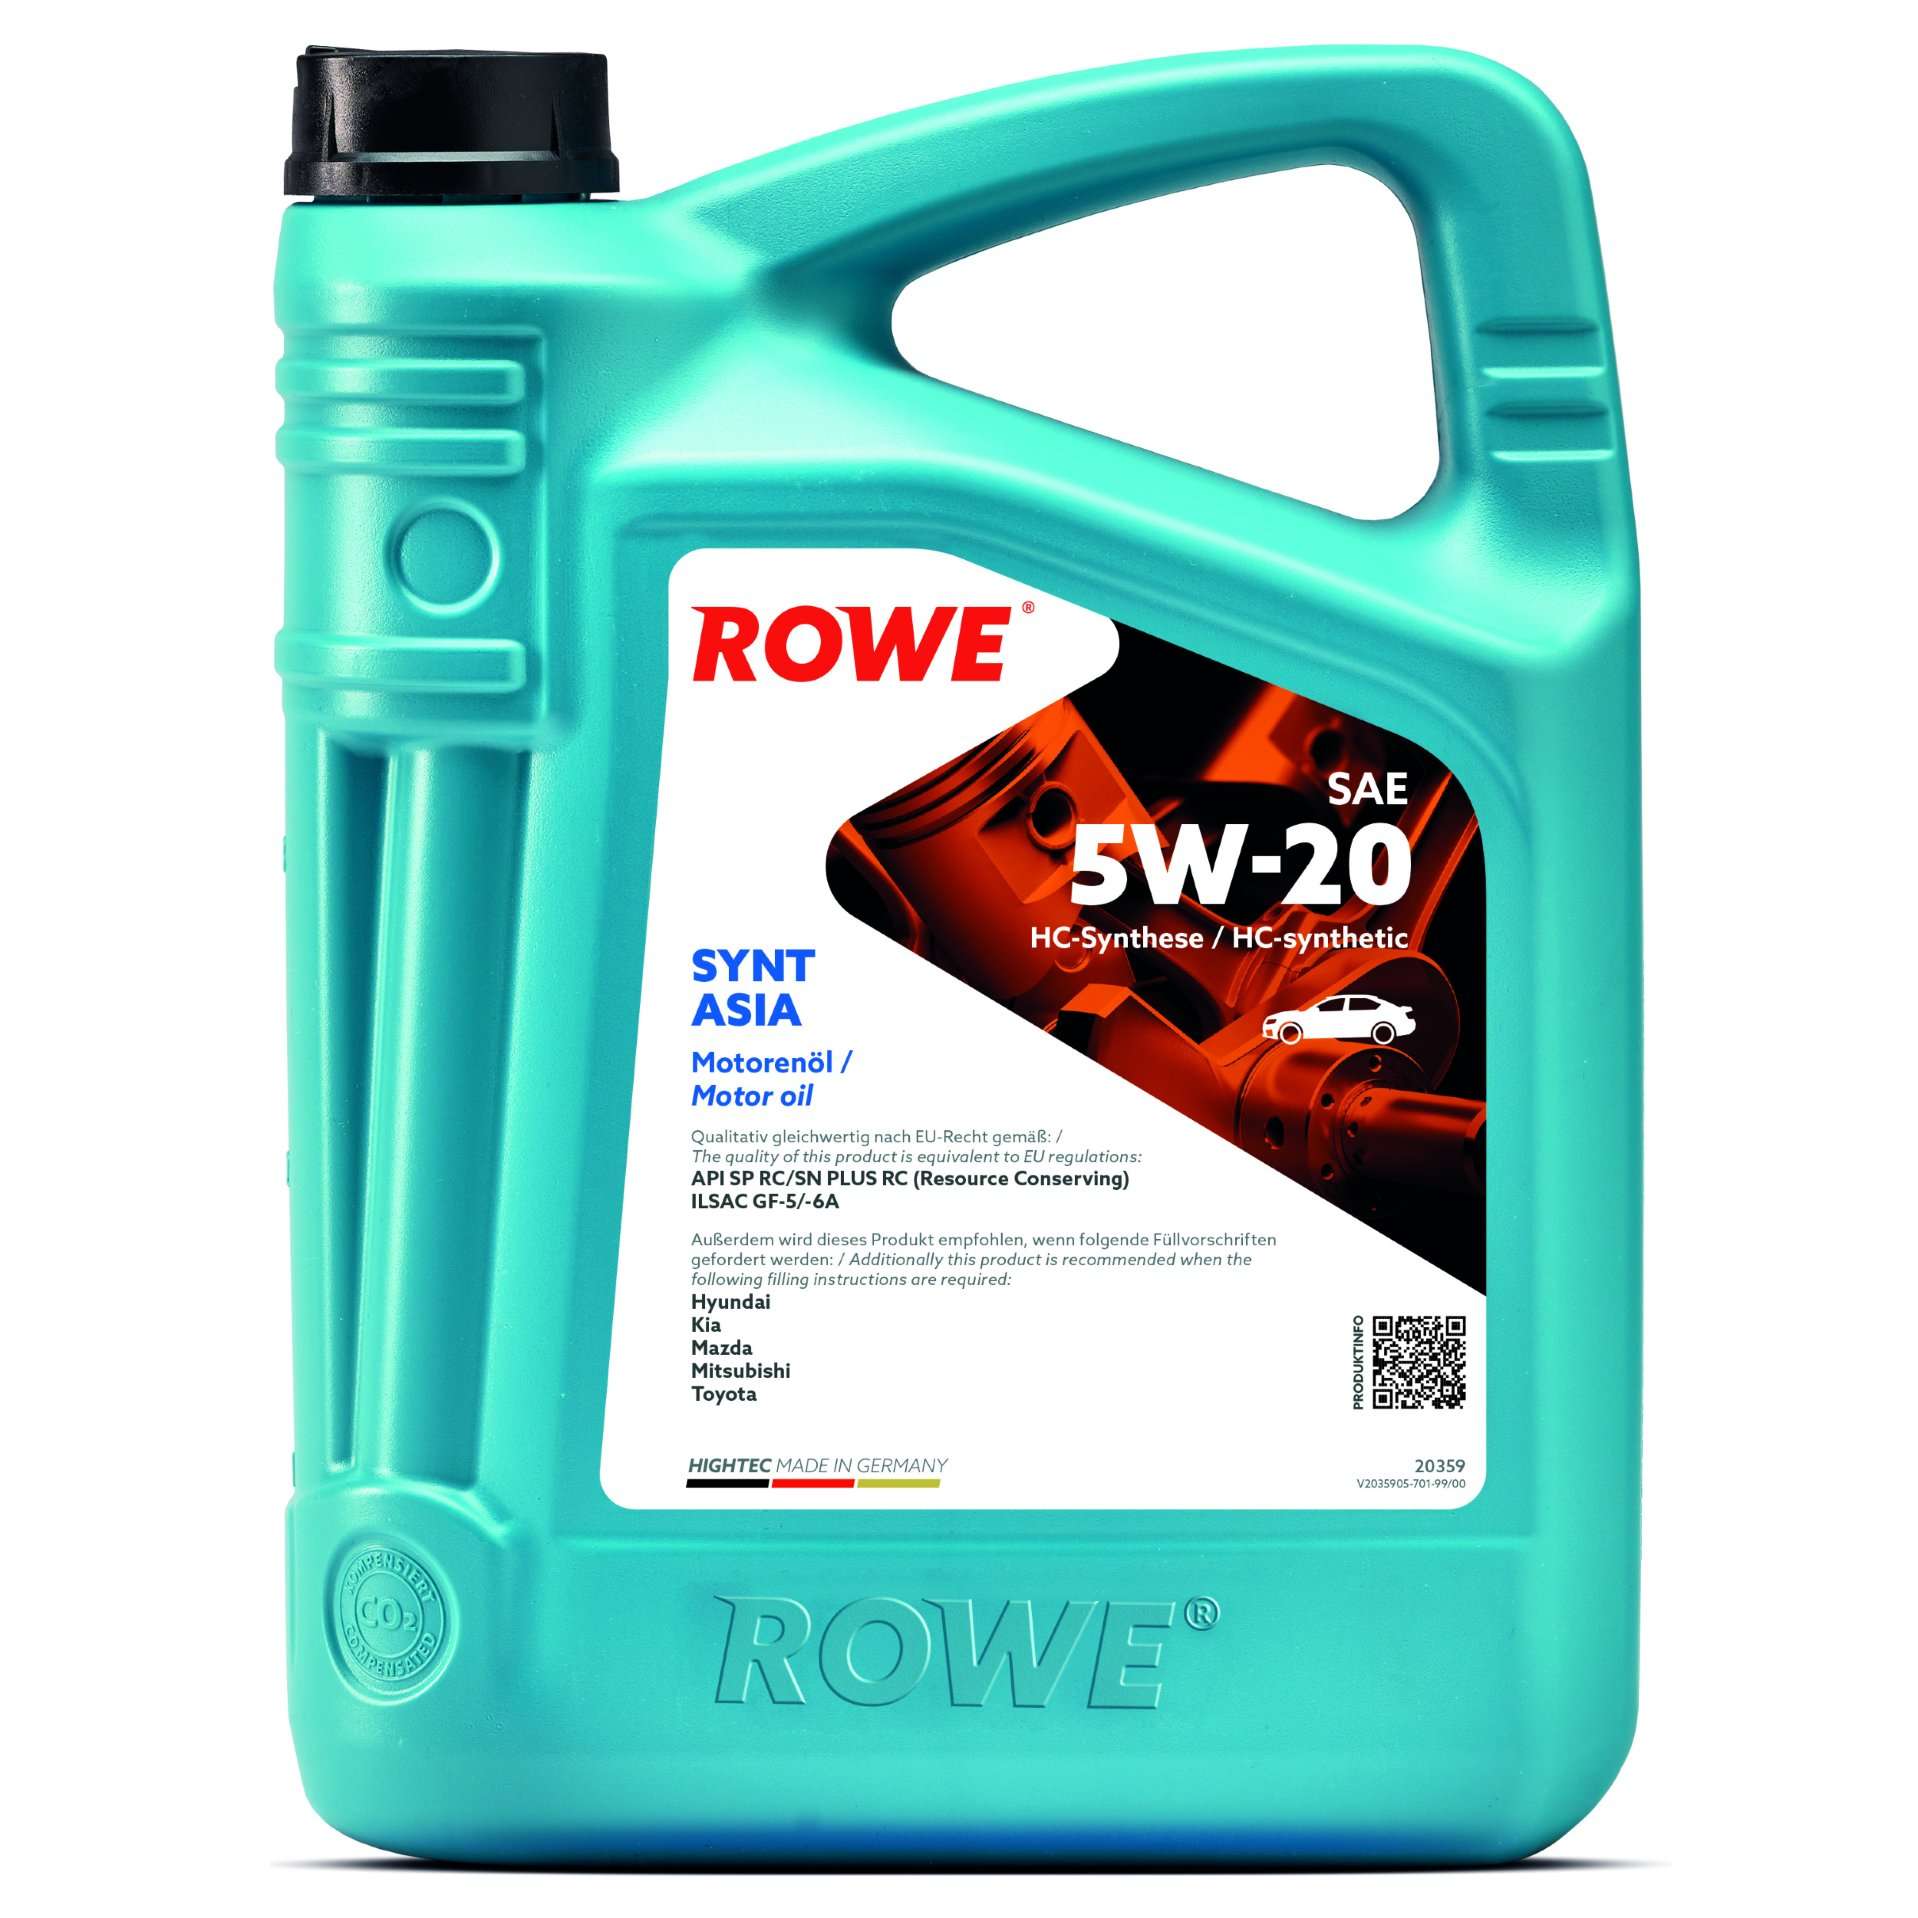 Моторное масло ROWE Synt Asia 5W-20 4 л, 20359-0040-99